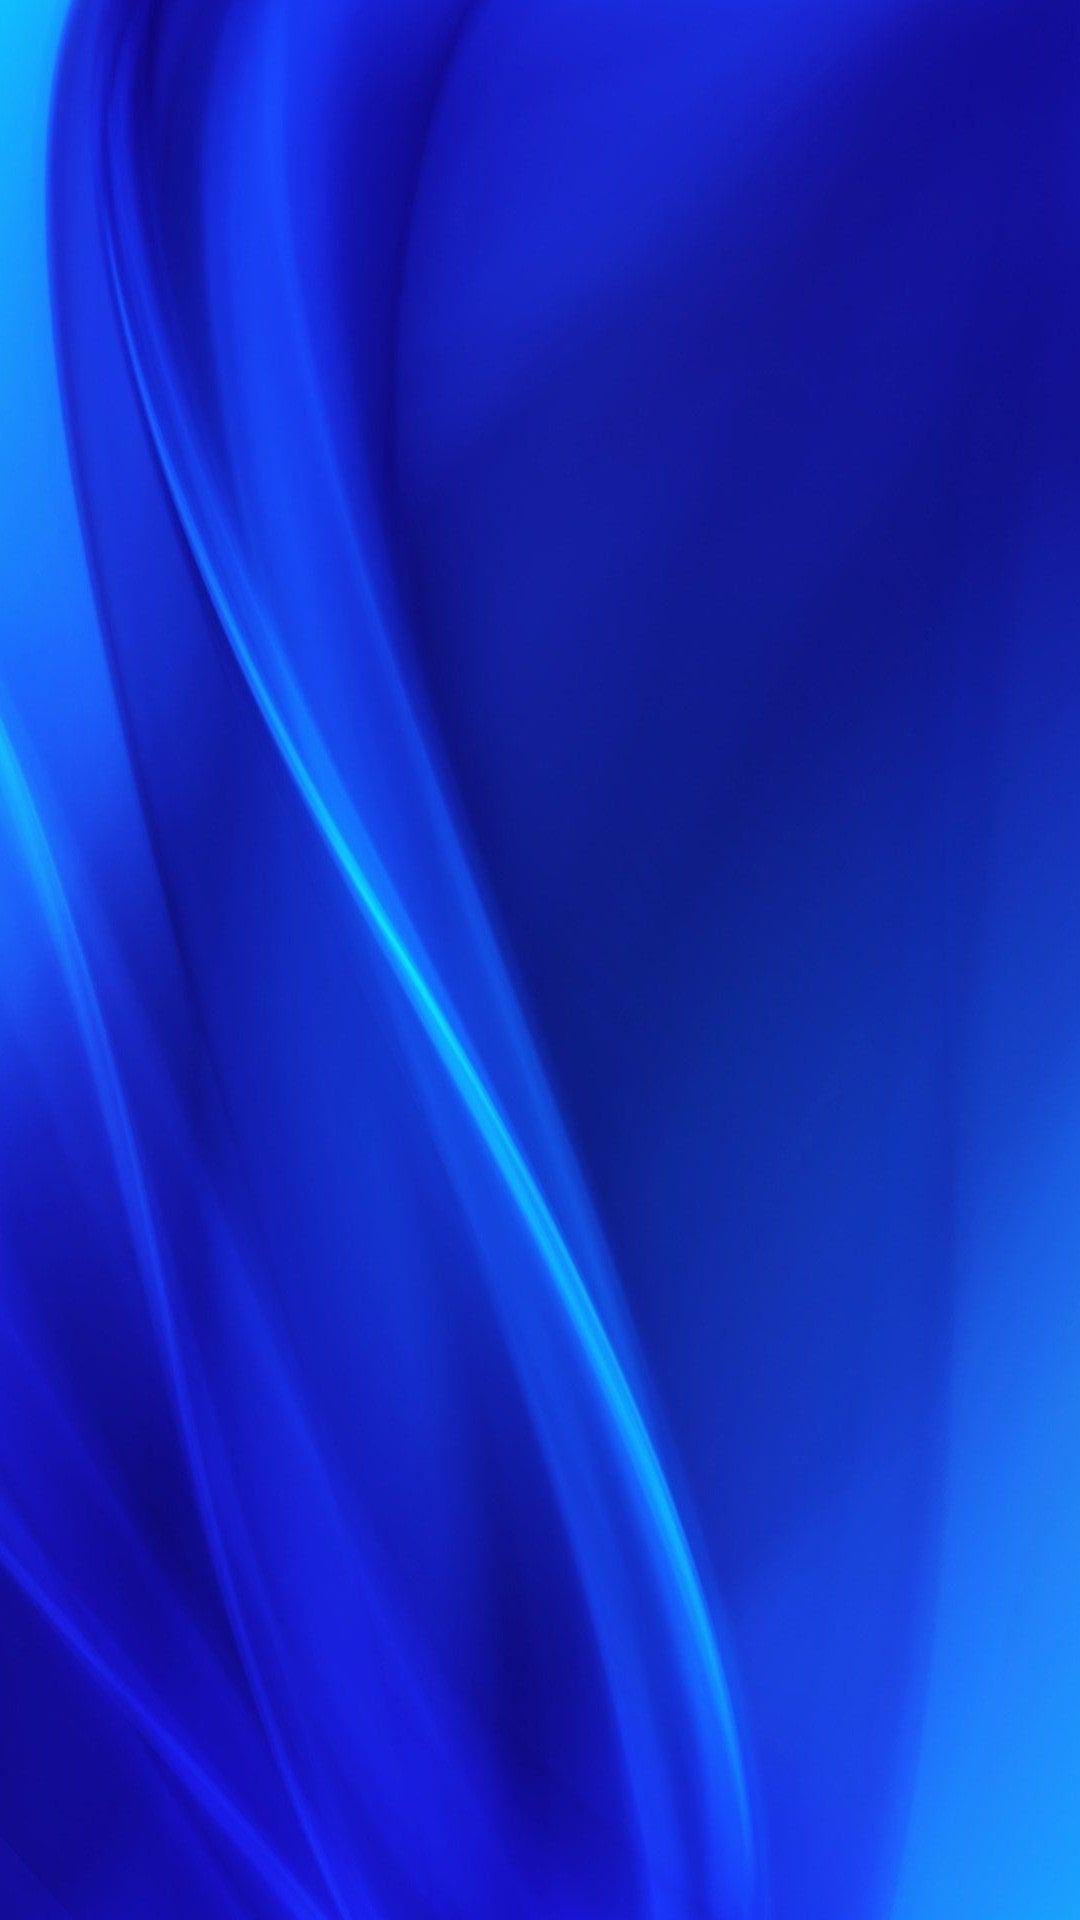 Blue abstract wallpaper for your phone or desktop background. - Dark blue